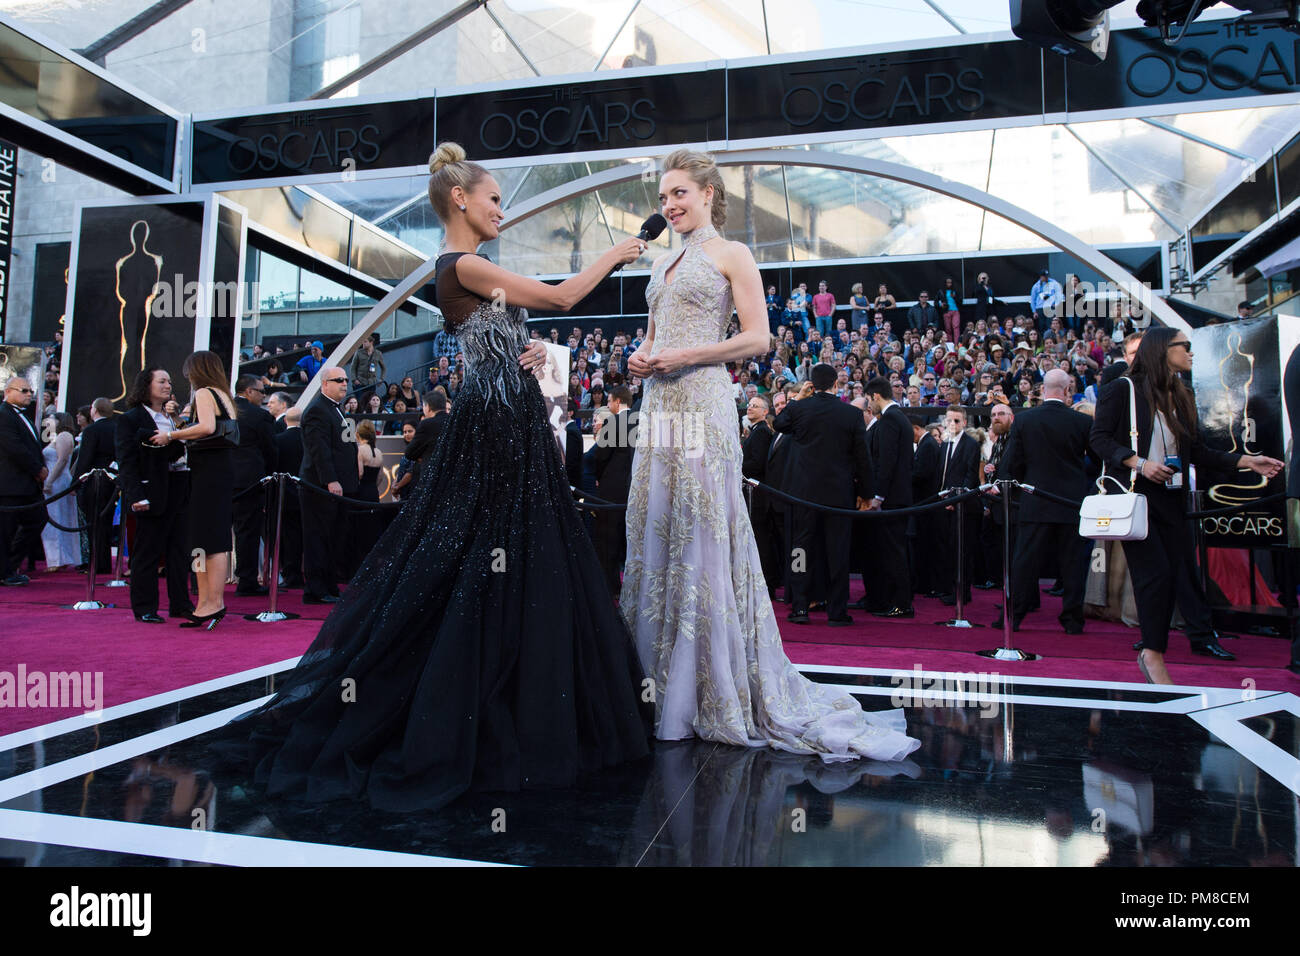 Actress Amanda Seyfried (R) talks with Kristin Chenoweth as she arrives for The Oscars® at the Dolby® Theatre in Hollywood, CA February 24, 2013. Stock Photo